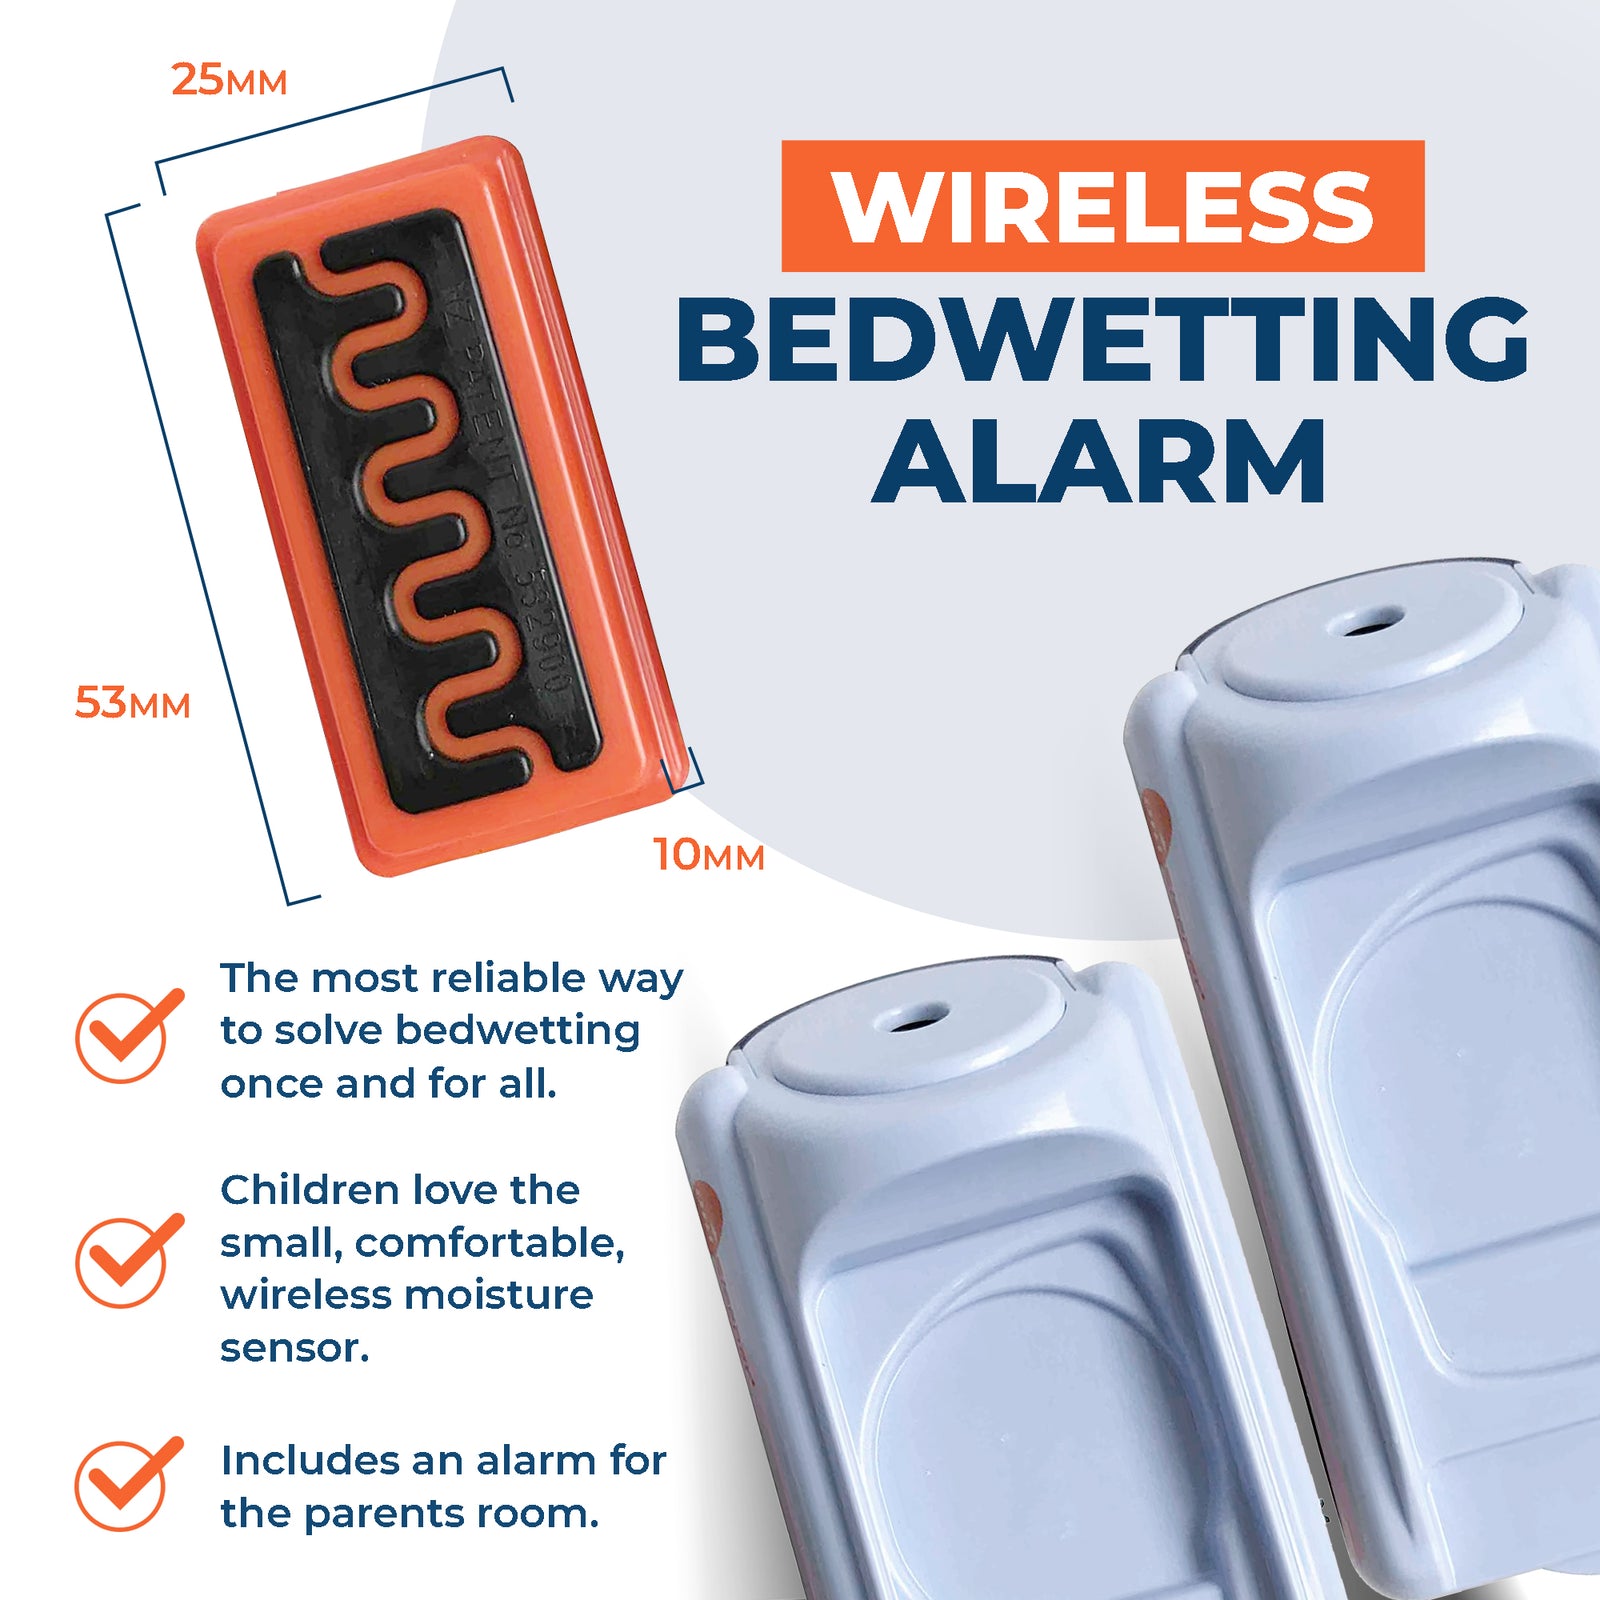 Child wets the bed? Let's wrap him in the equivalent of a water balloon  hooked up to an electric alarm. If he survives, a …